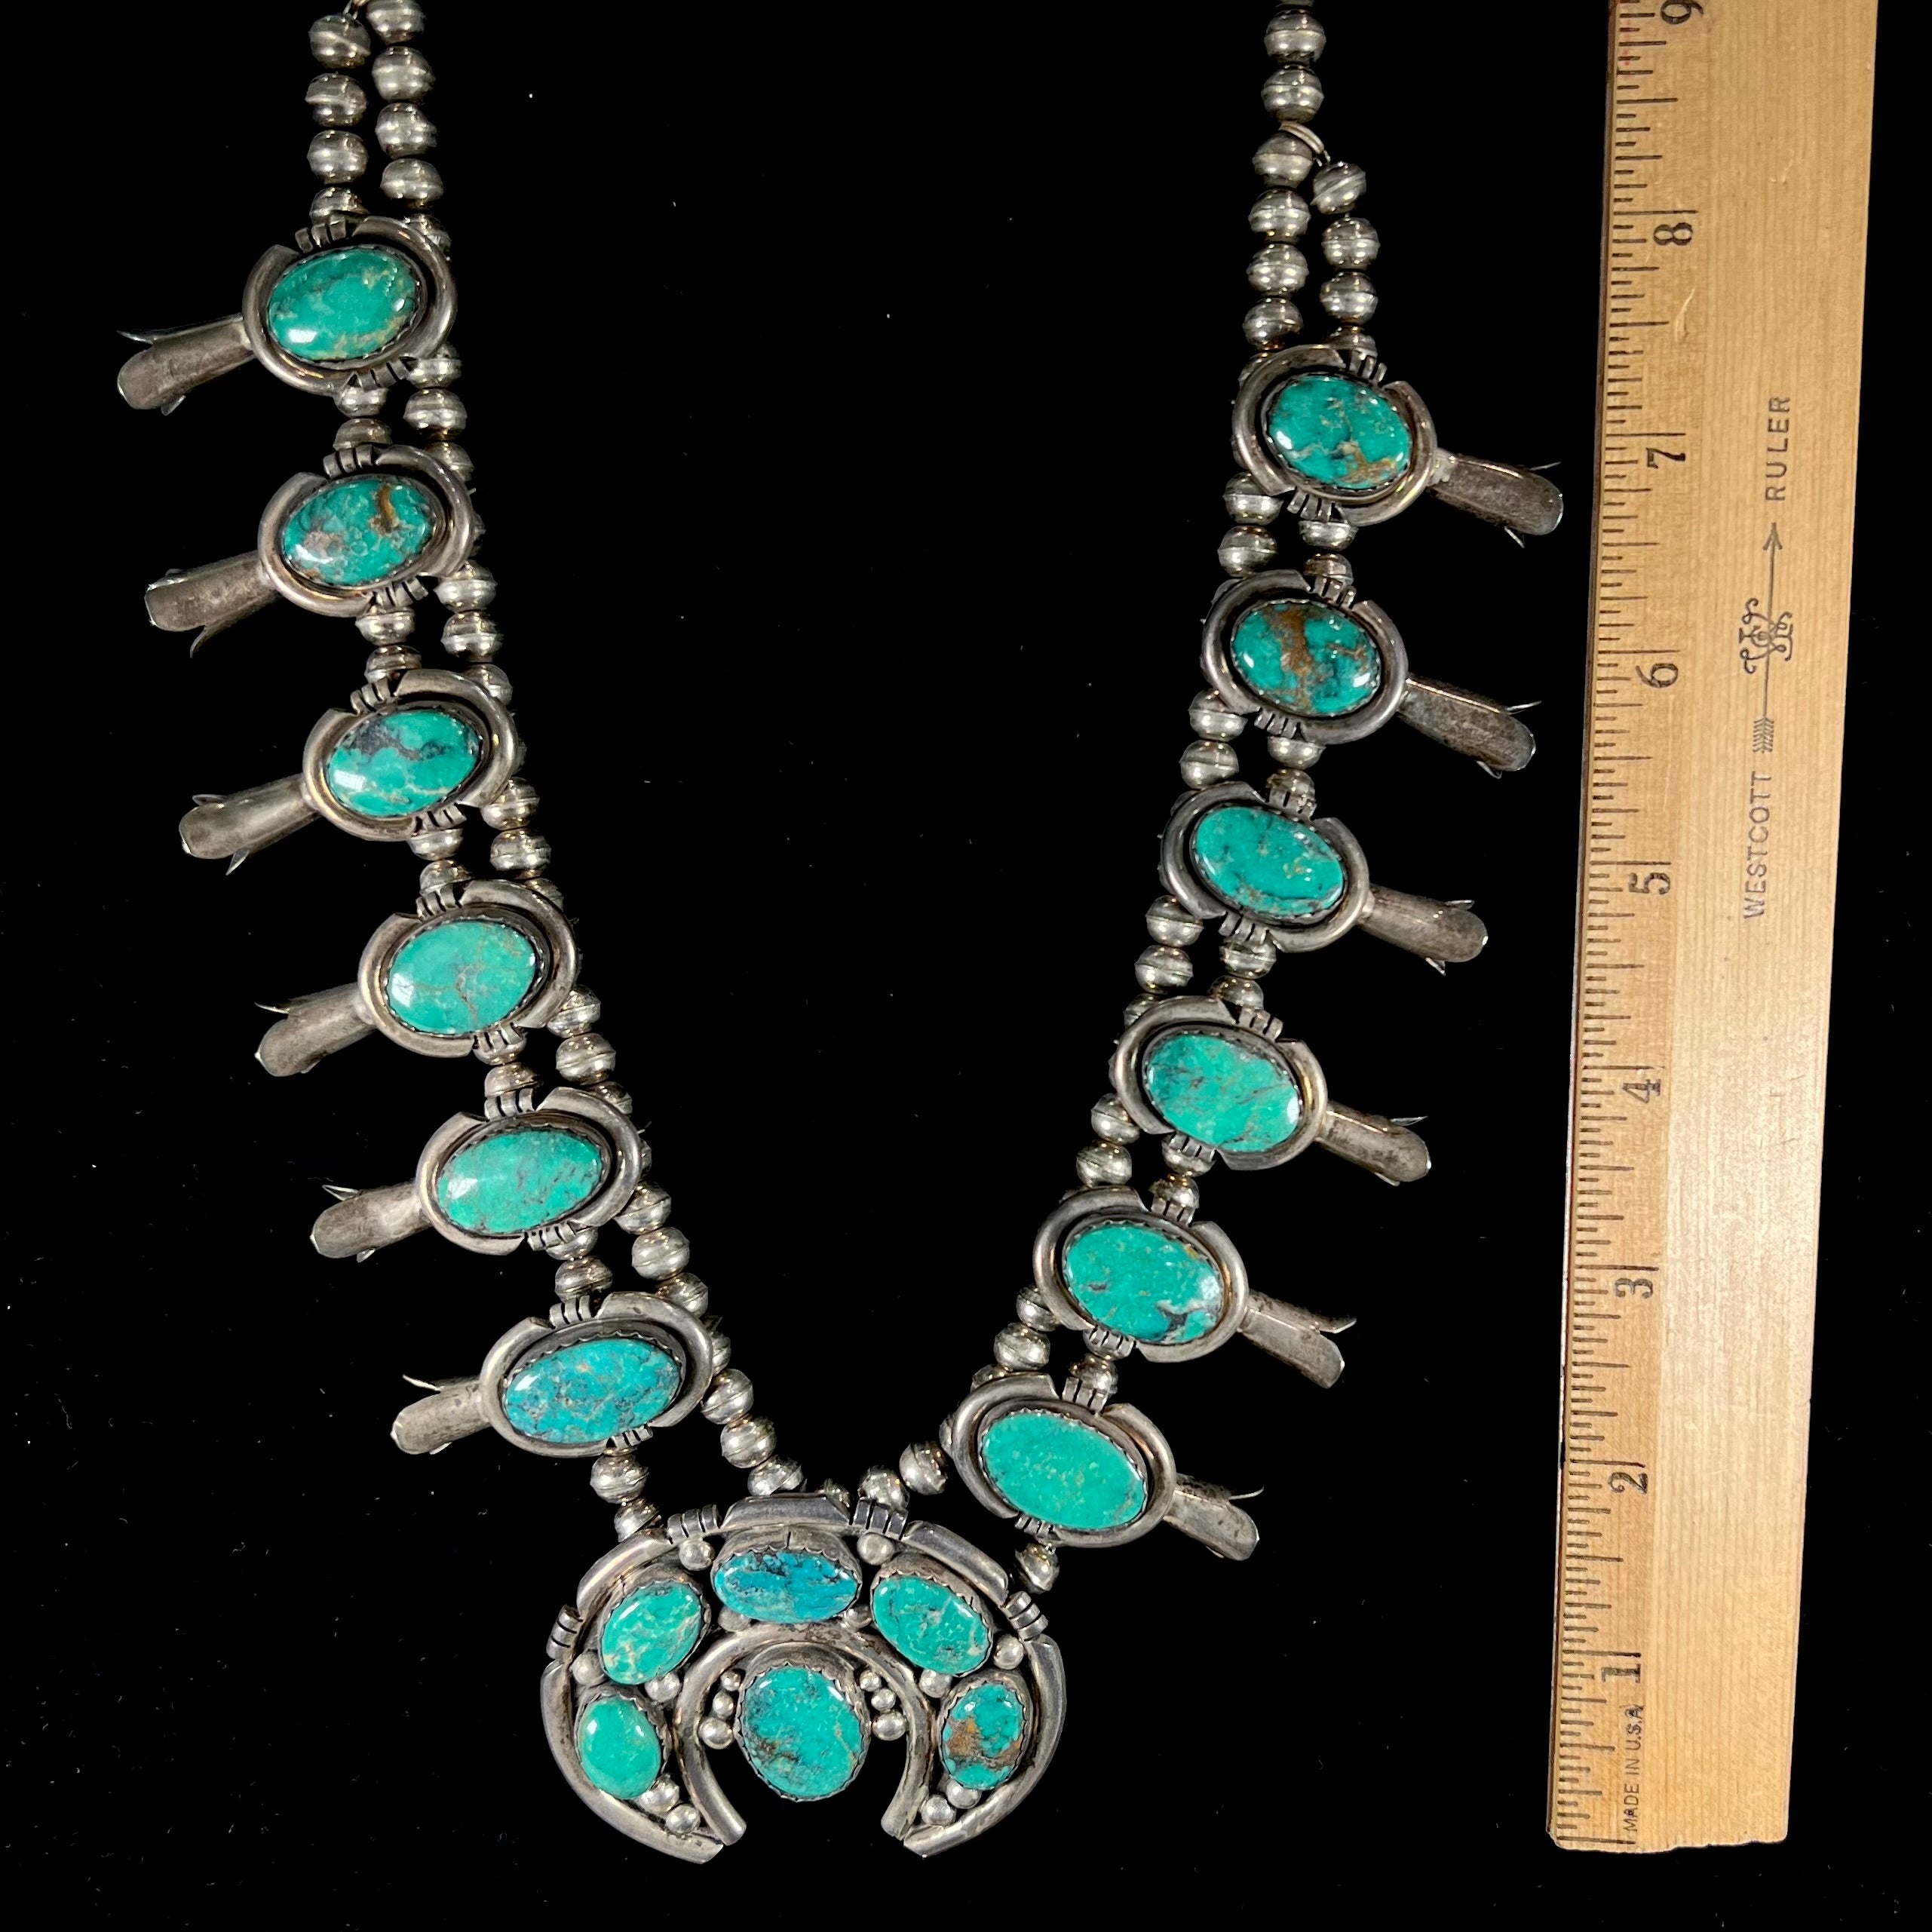 Coral Squash Blossom - Native American Turquoise Jewelry